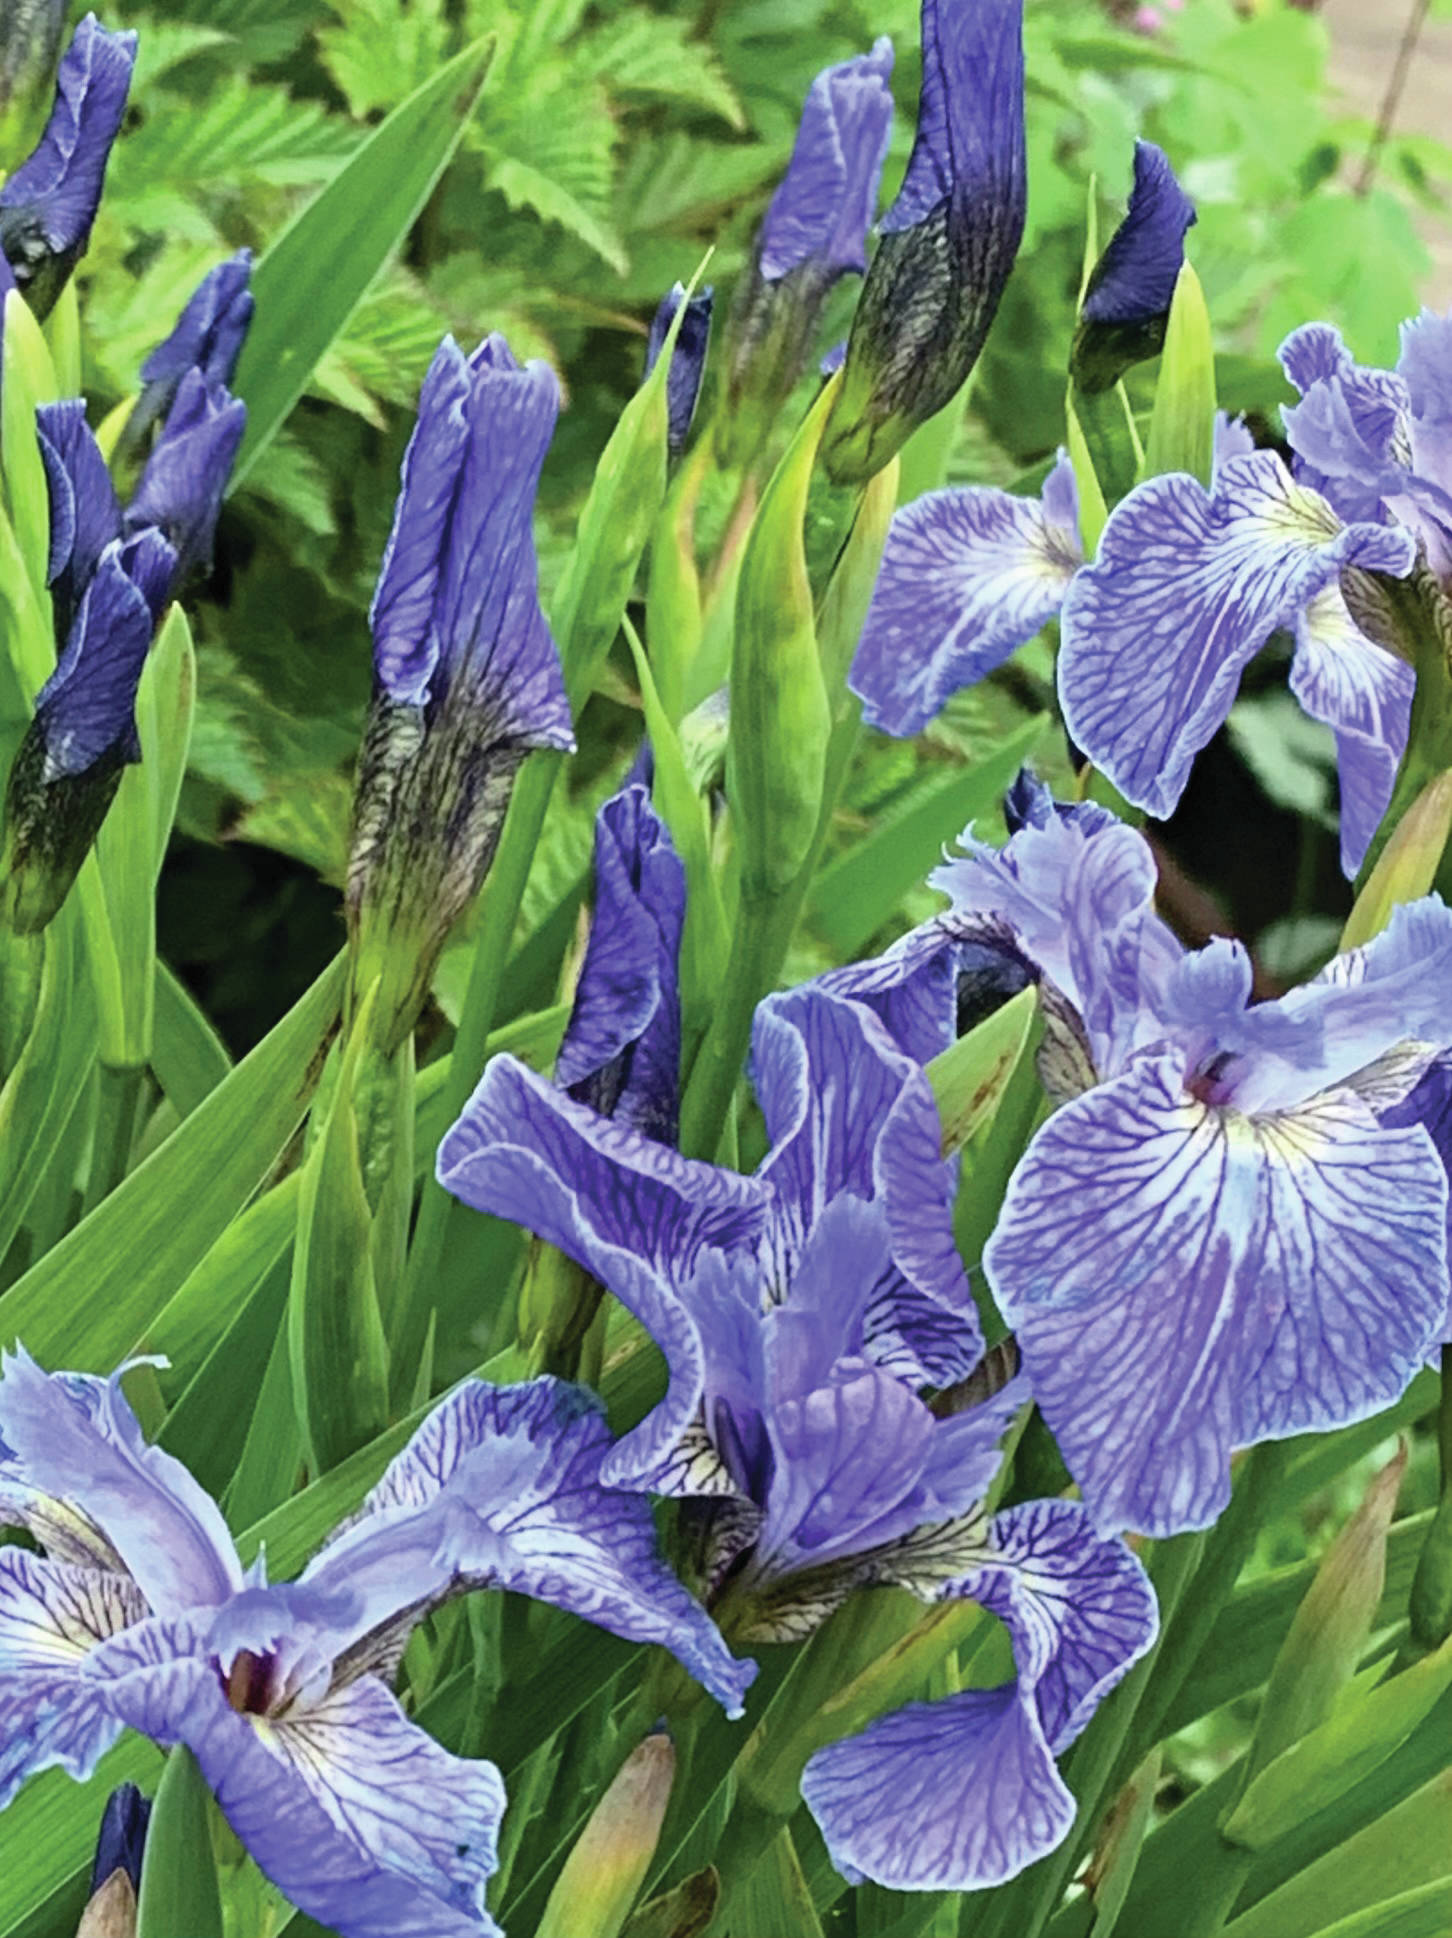 Our native iris setosa making the most of a boggy area. (Photo by Rosemary Fitzpatrick)